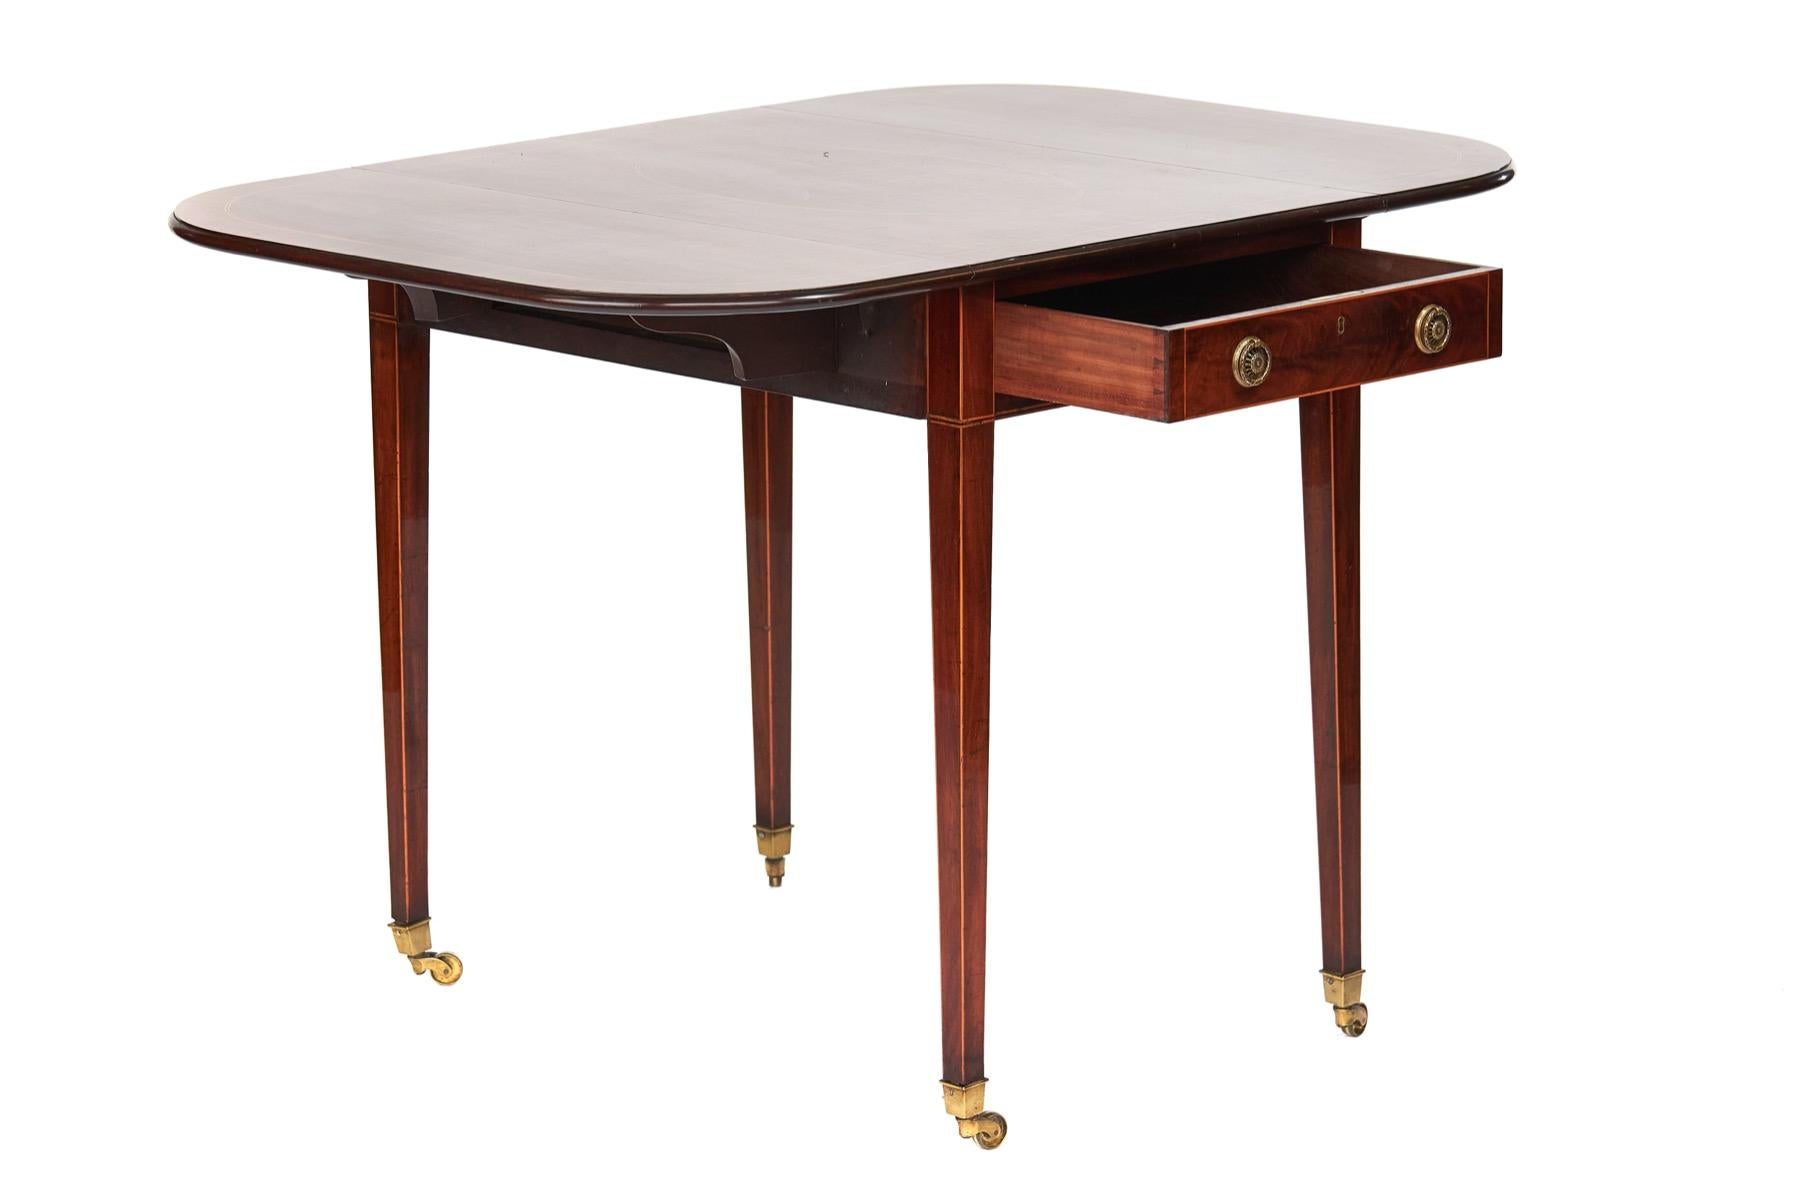 Fine Regency Mahogany & inlaid Pembroke Table
Striking Figured Mahogany top, With 
Twin Boxwood line inlay, & Cross Banding, 
Single opening drawer, And Faux Drawer front at ends, 
Square Tapering Legs with Square cup castors, brass wheel.